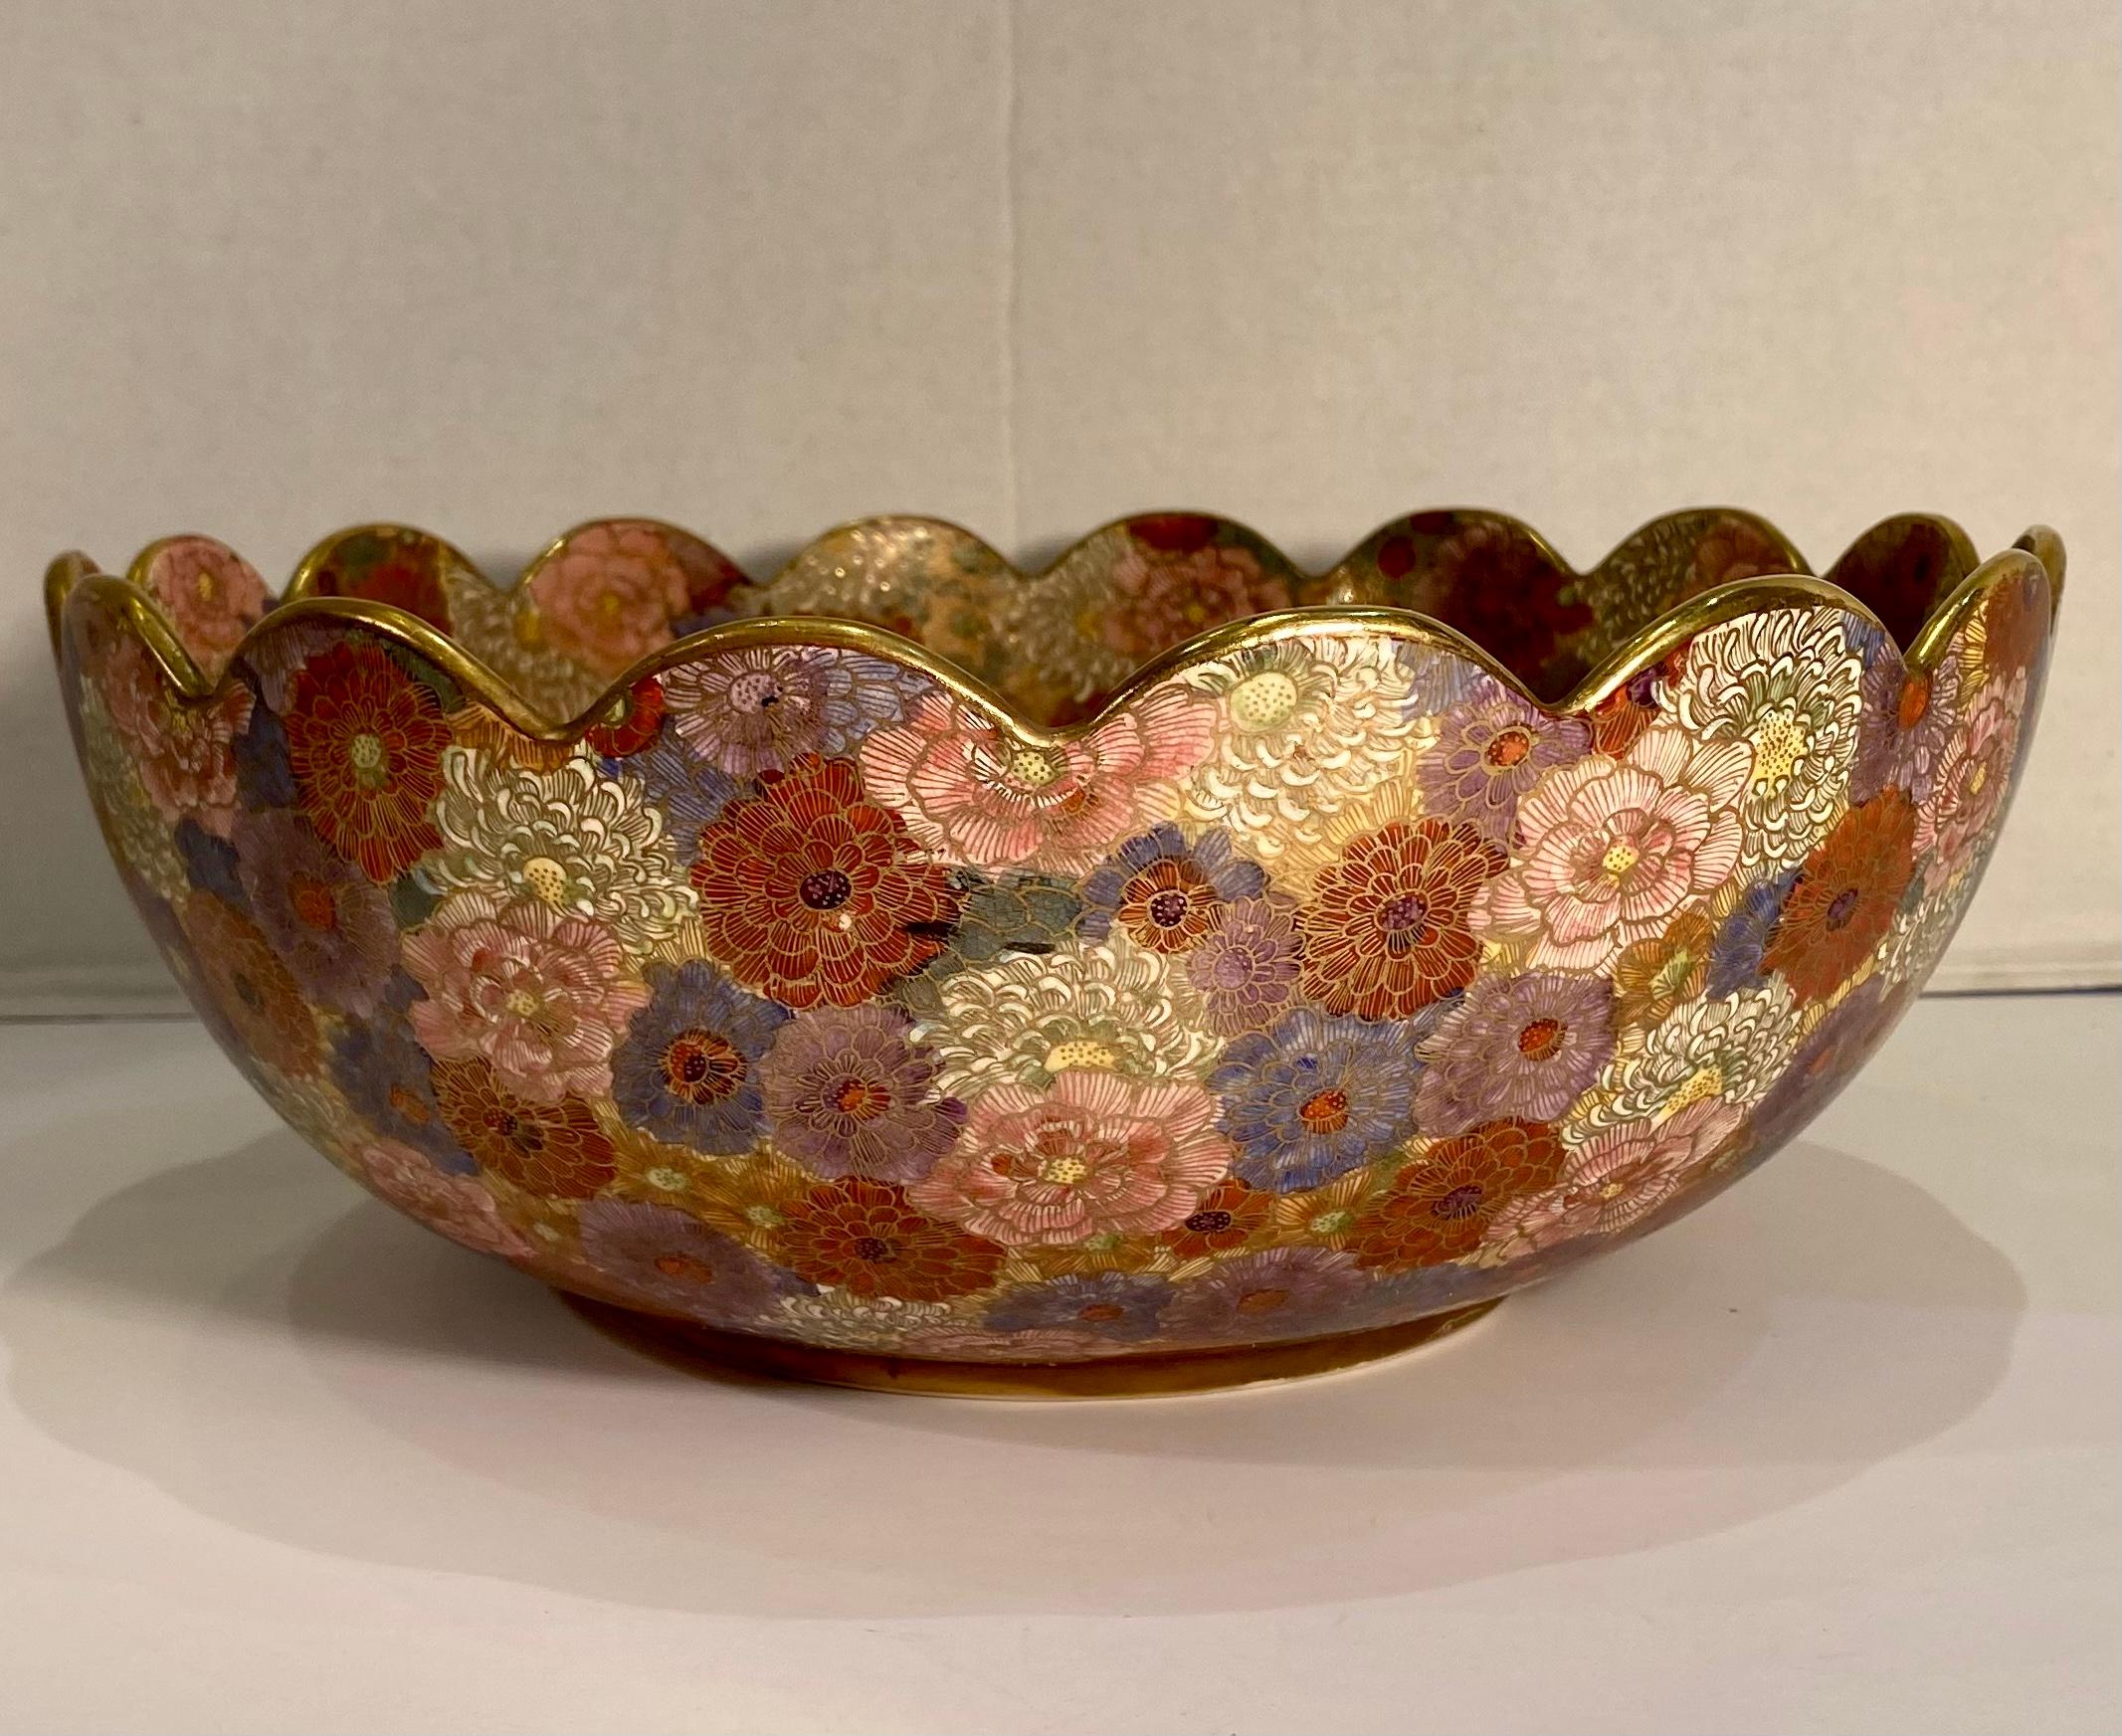 Magnificent handmade and hand-painted collectible Occupied Japan, Japanese export ware, large centerpiece bowl in the Satsuma style made by the Shozan factory. Shozan is famous for their Satsuma style porcelain. Hallmarked Shozan and Made in